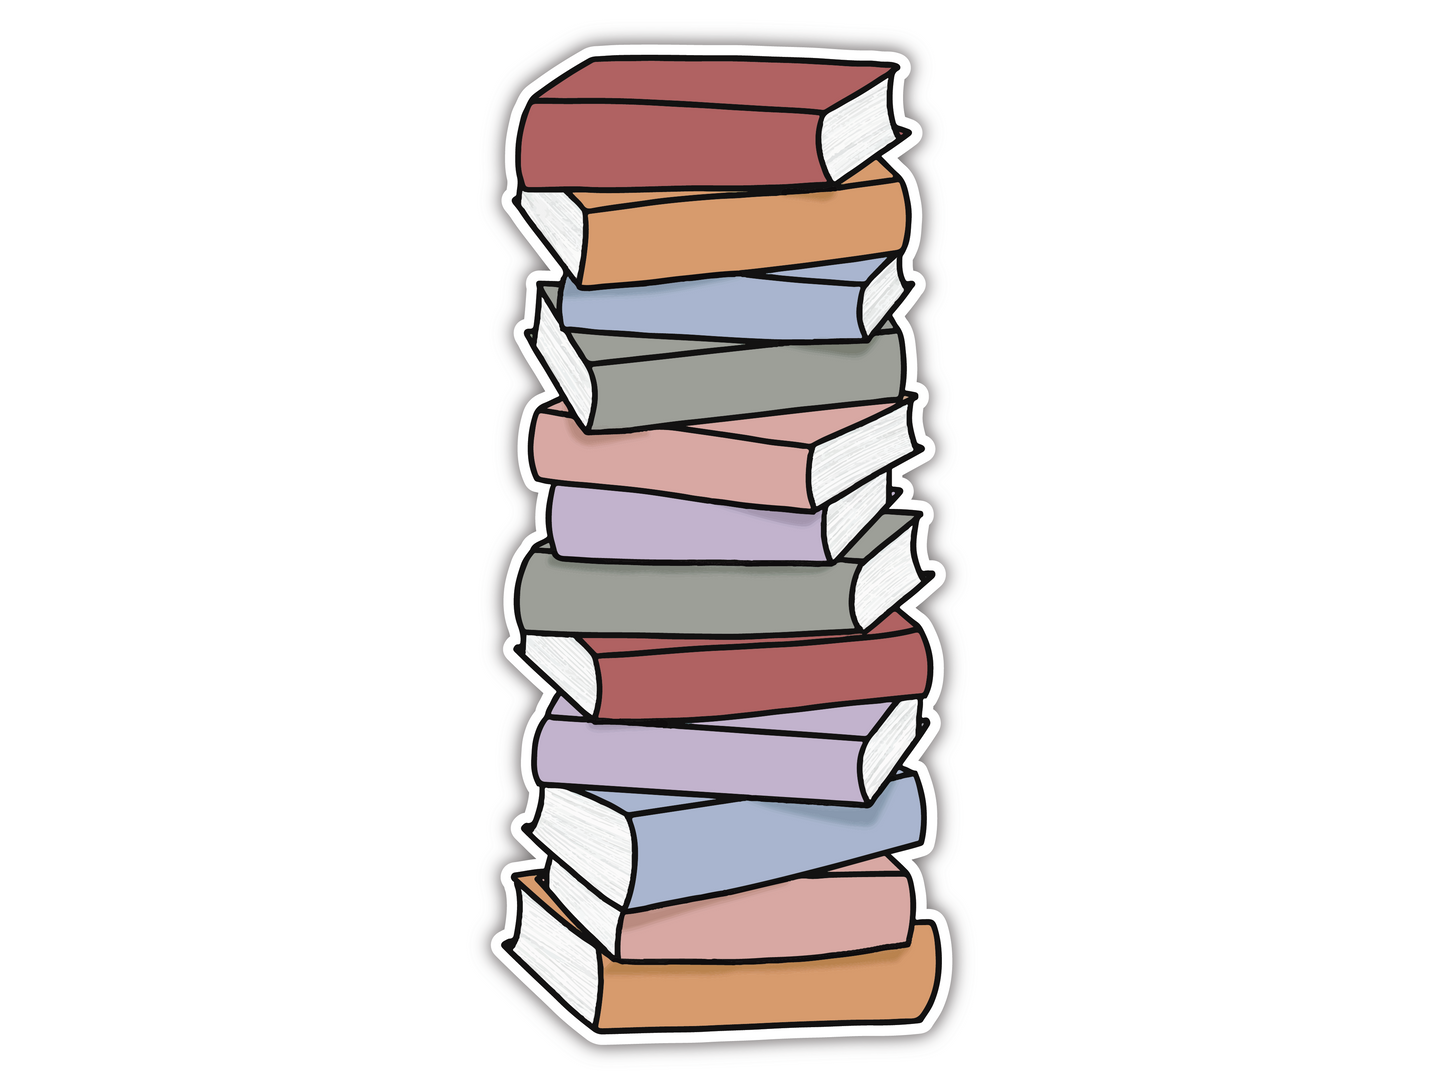 stack of books images